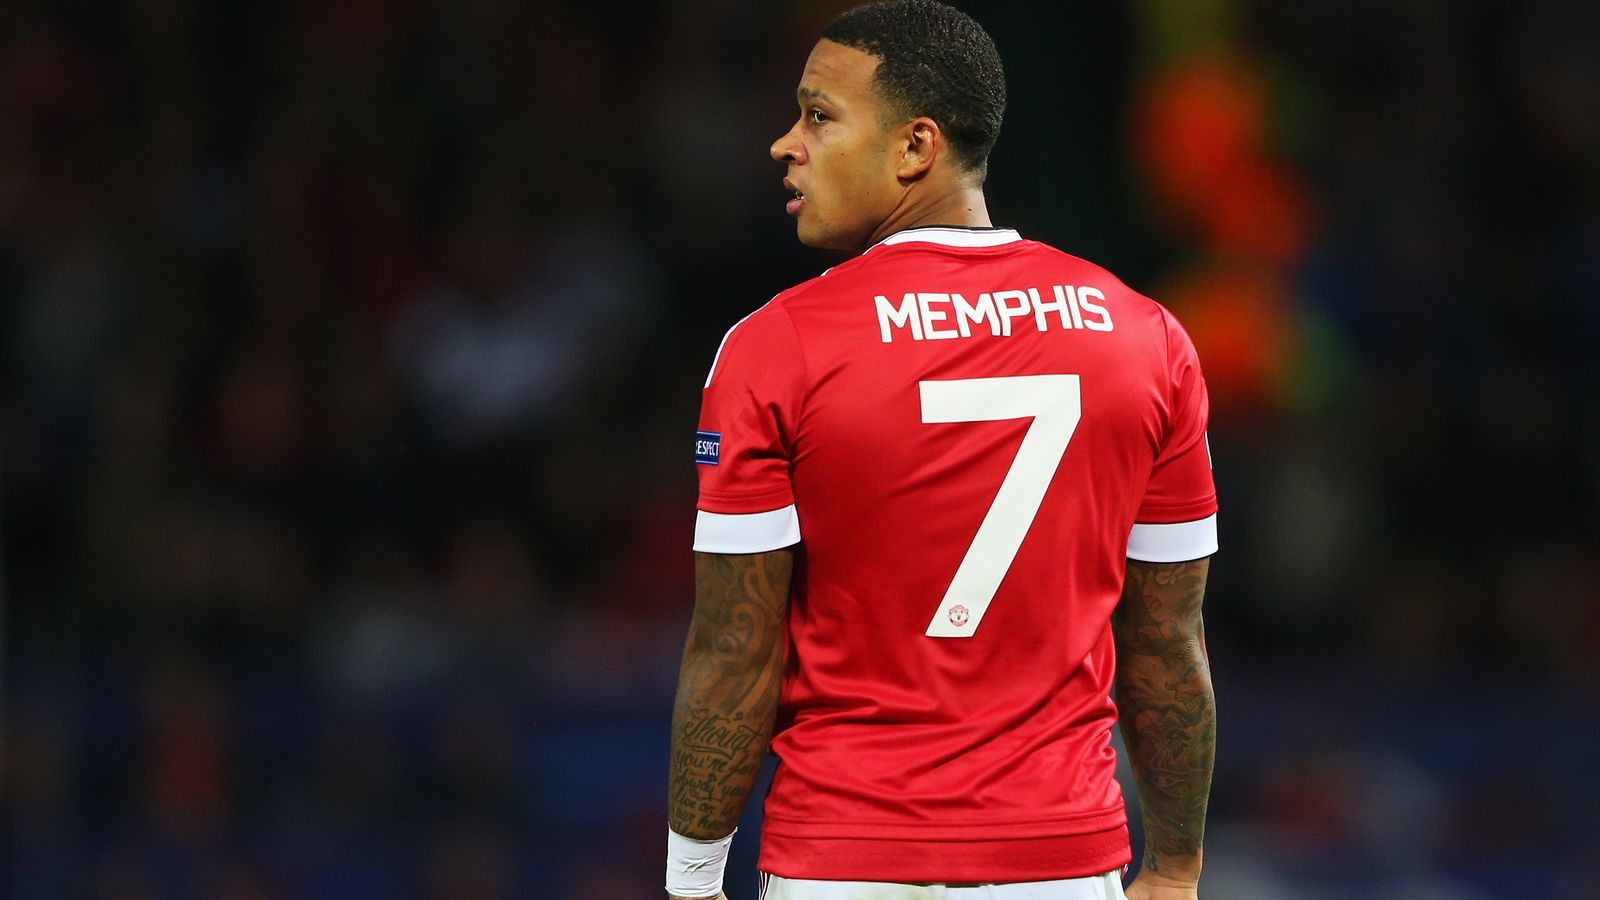 Depay manchester united - Pagine Romaniste